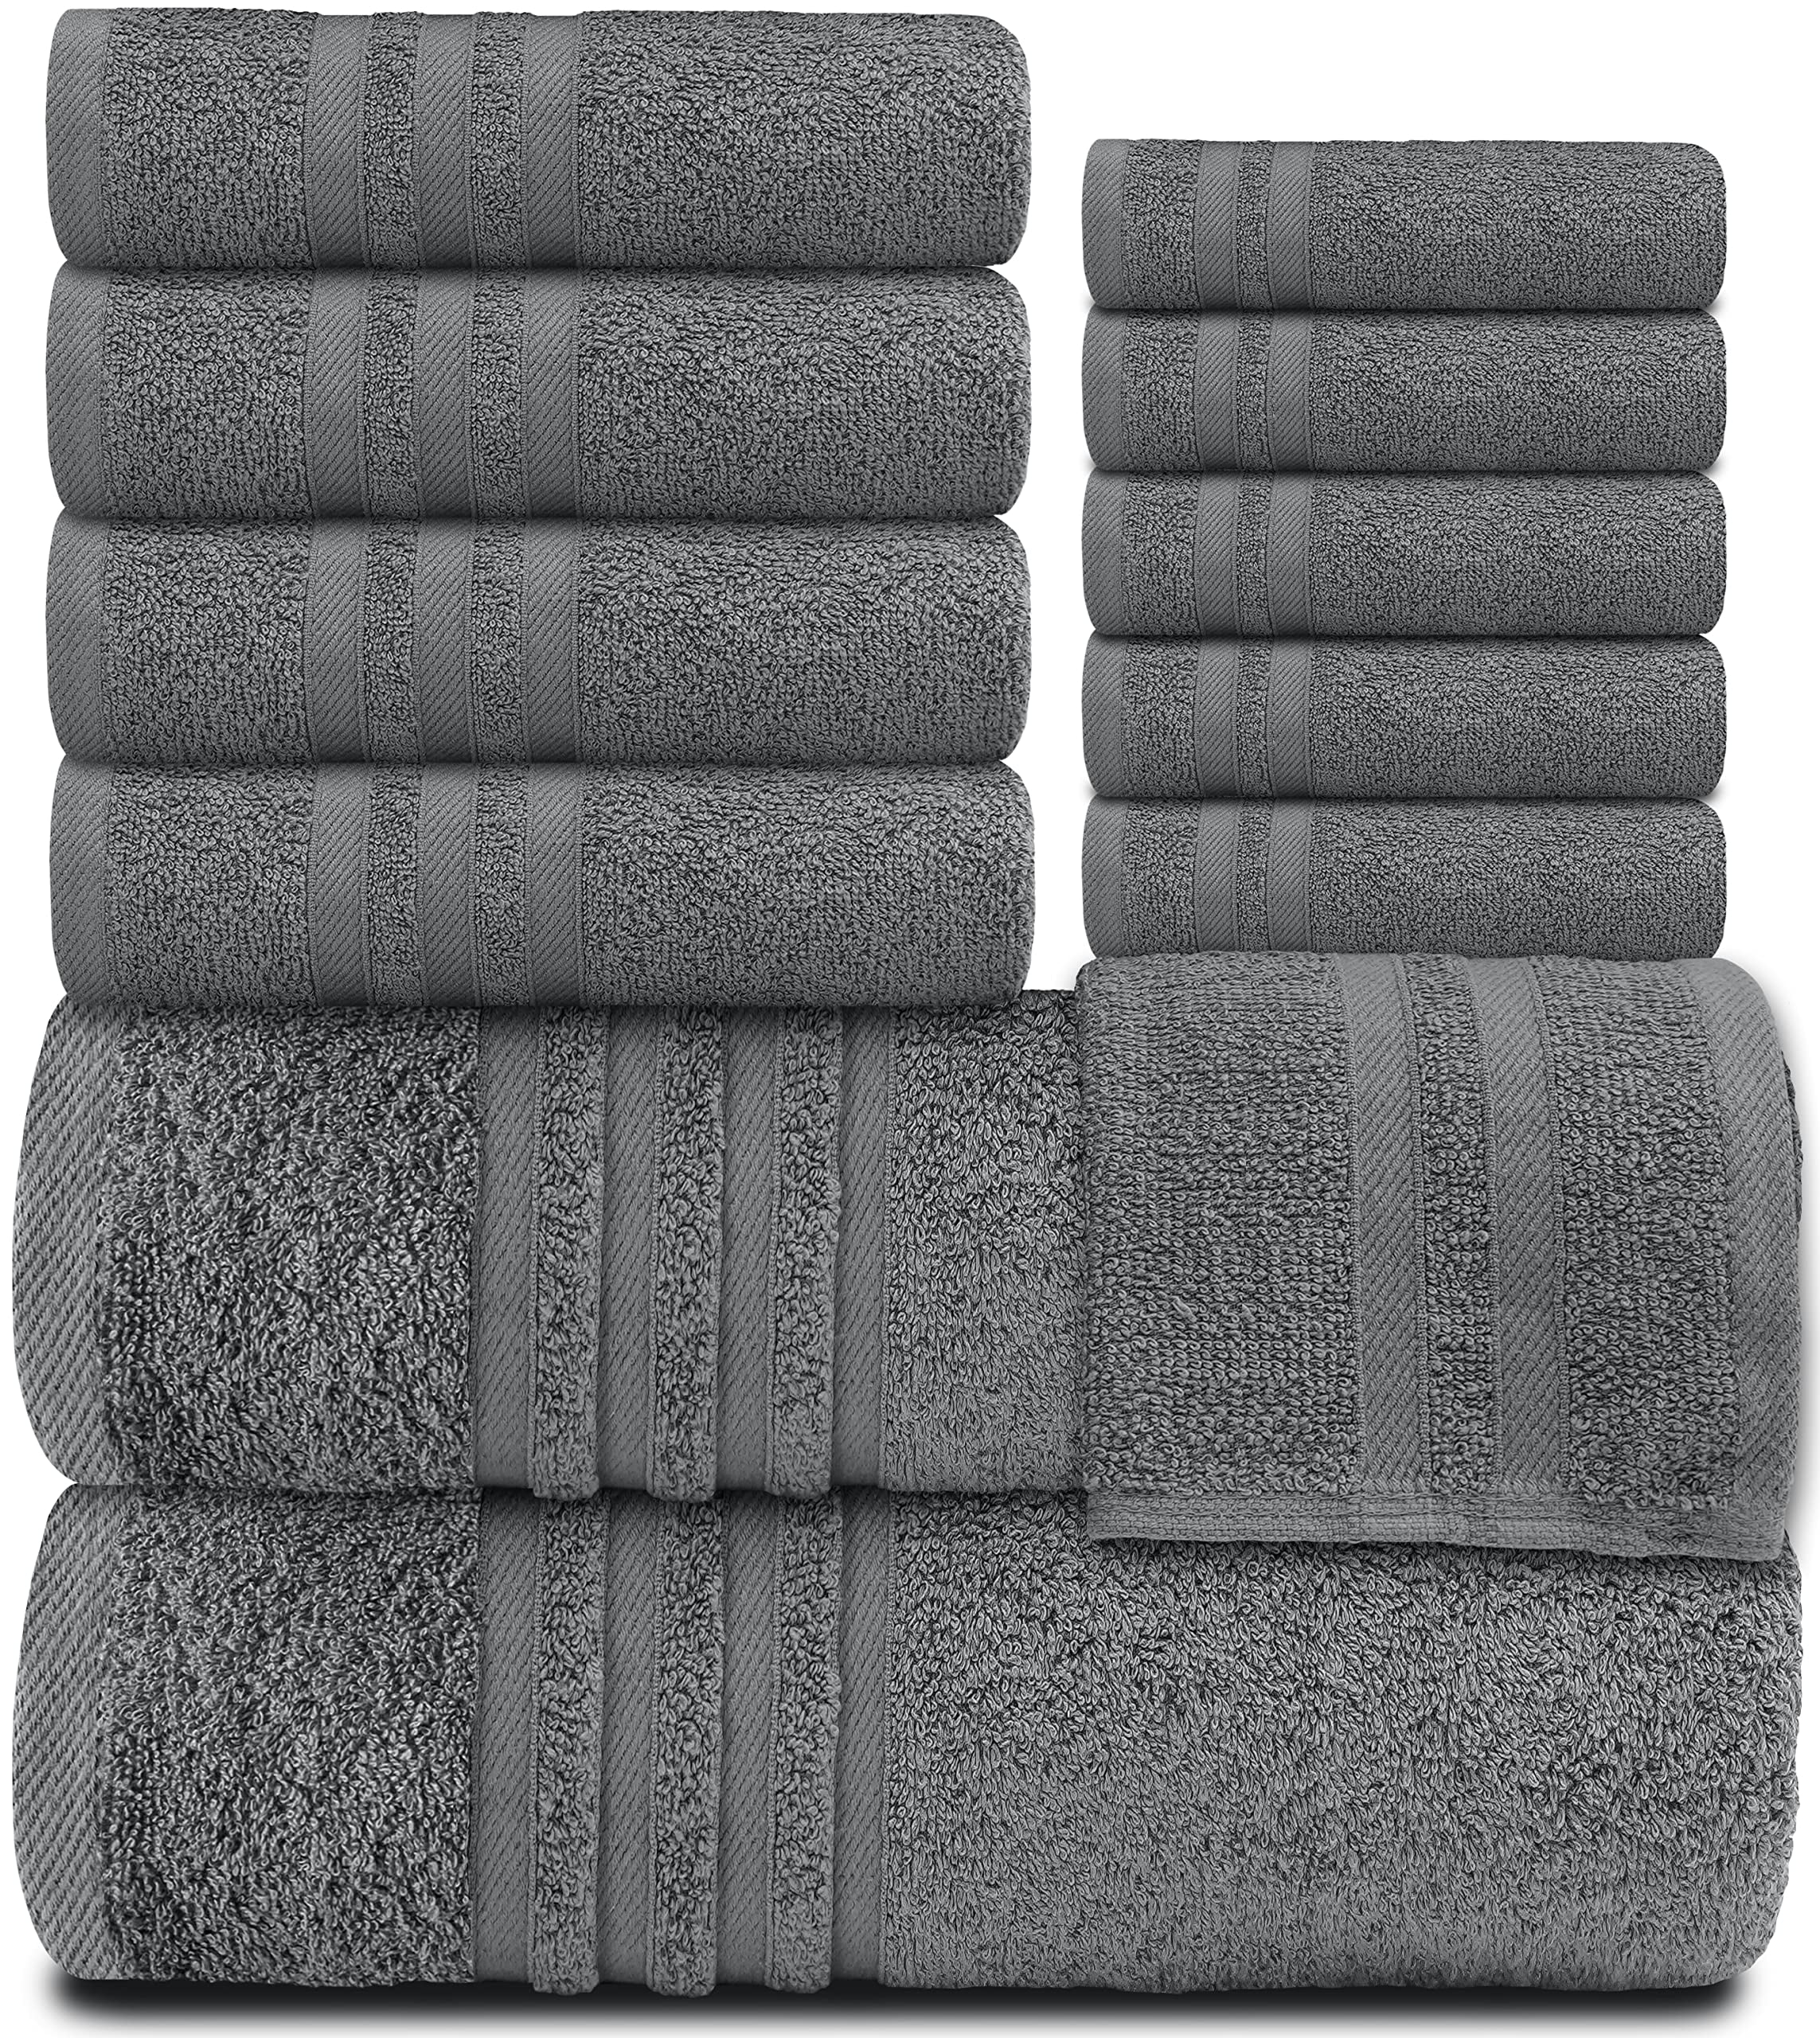 White Classic 12 Piece Bath Towel Set for Bathroom - Wealuxe Collection 2 Bath  Towels, 4 Hand Towels, 6 Washcloths 100% Cotton Soft and Plush Highly  Absorbent, Soft Towel for Hotel & Spa - Ivory 